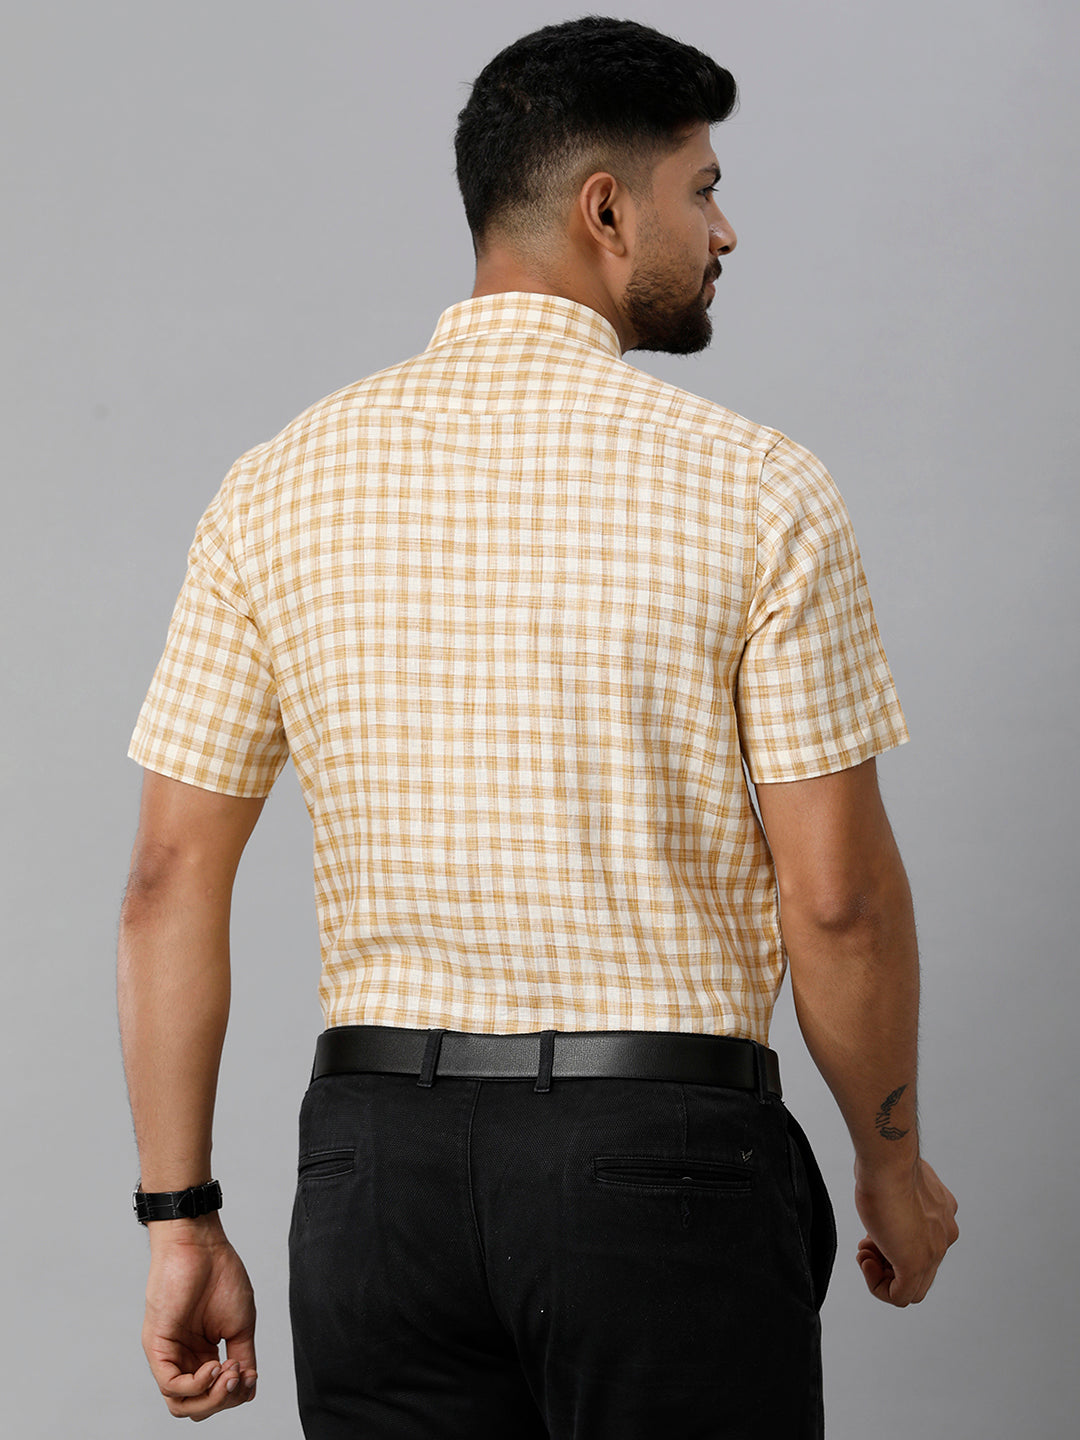 Mens Pure Linen Checked Half Sleeves Cream & Brown Shirt LS39-Back view